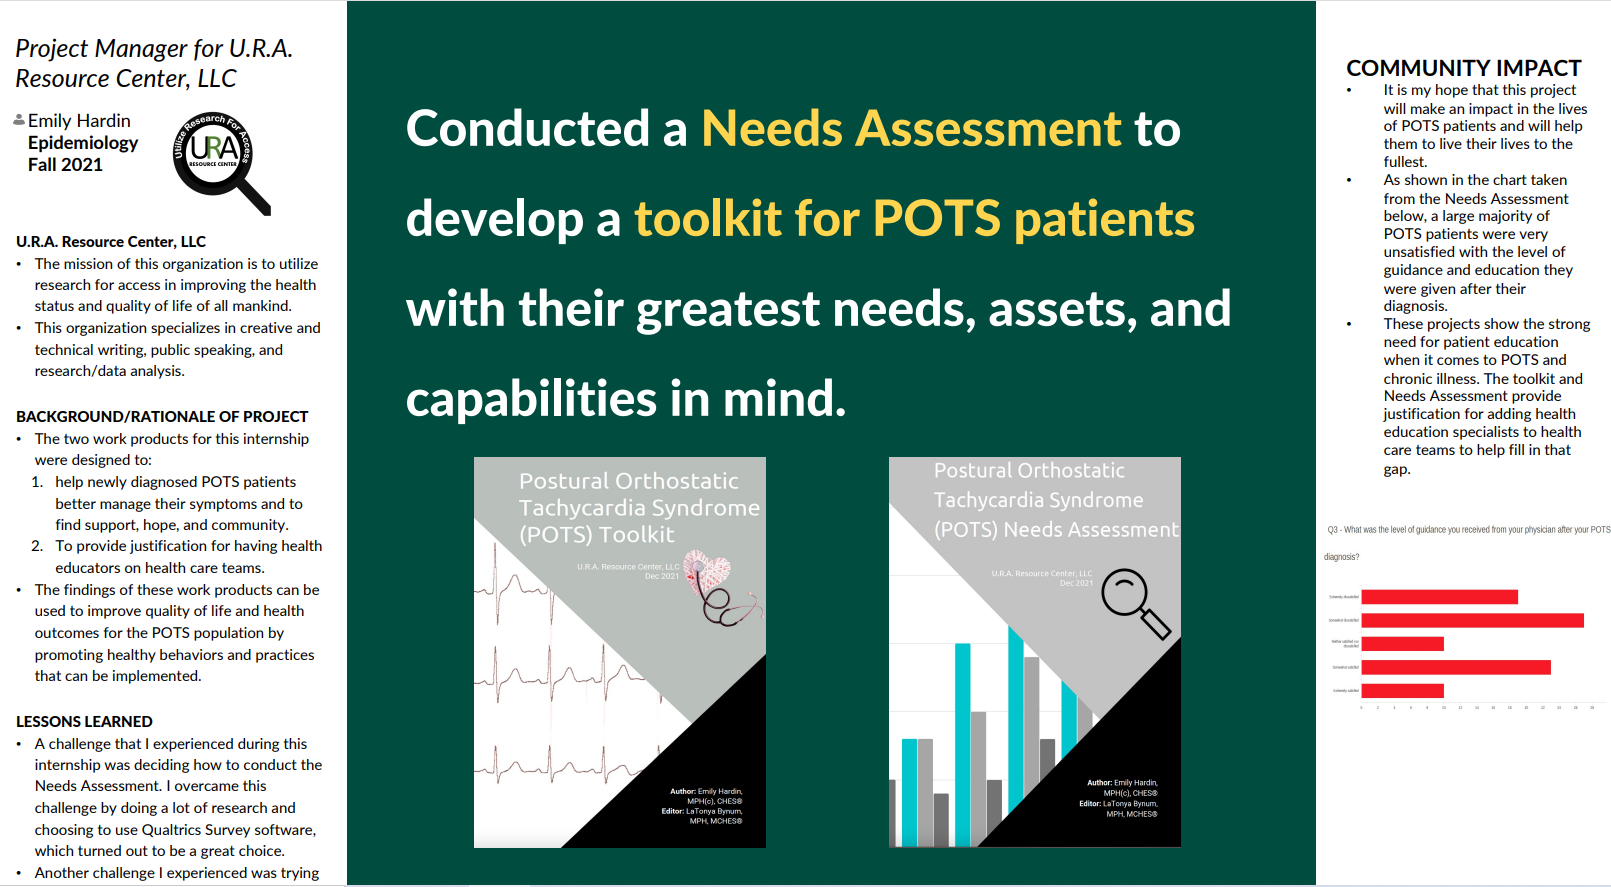 POTS Toolkit Abstract Poster by Emily Hardin, MPH